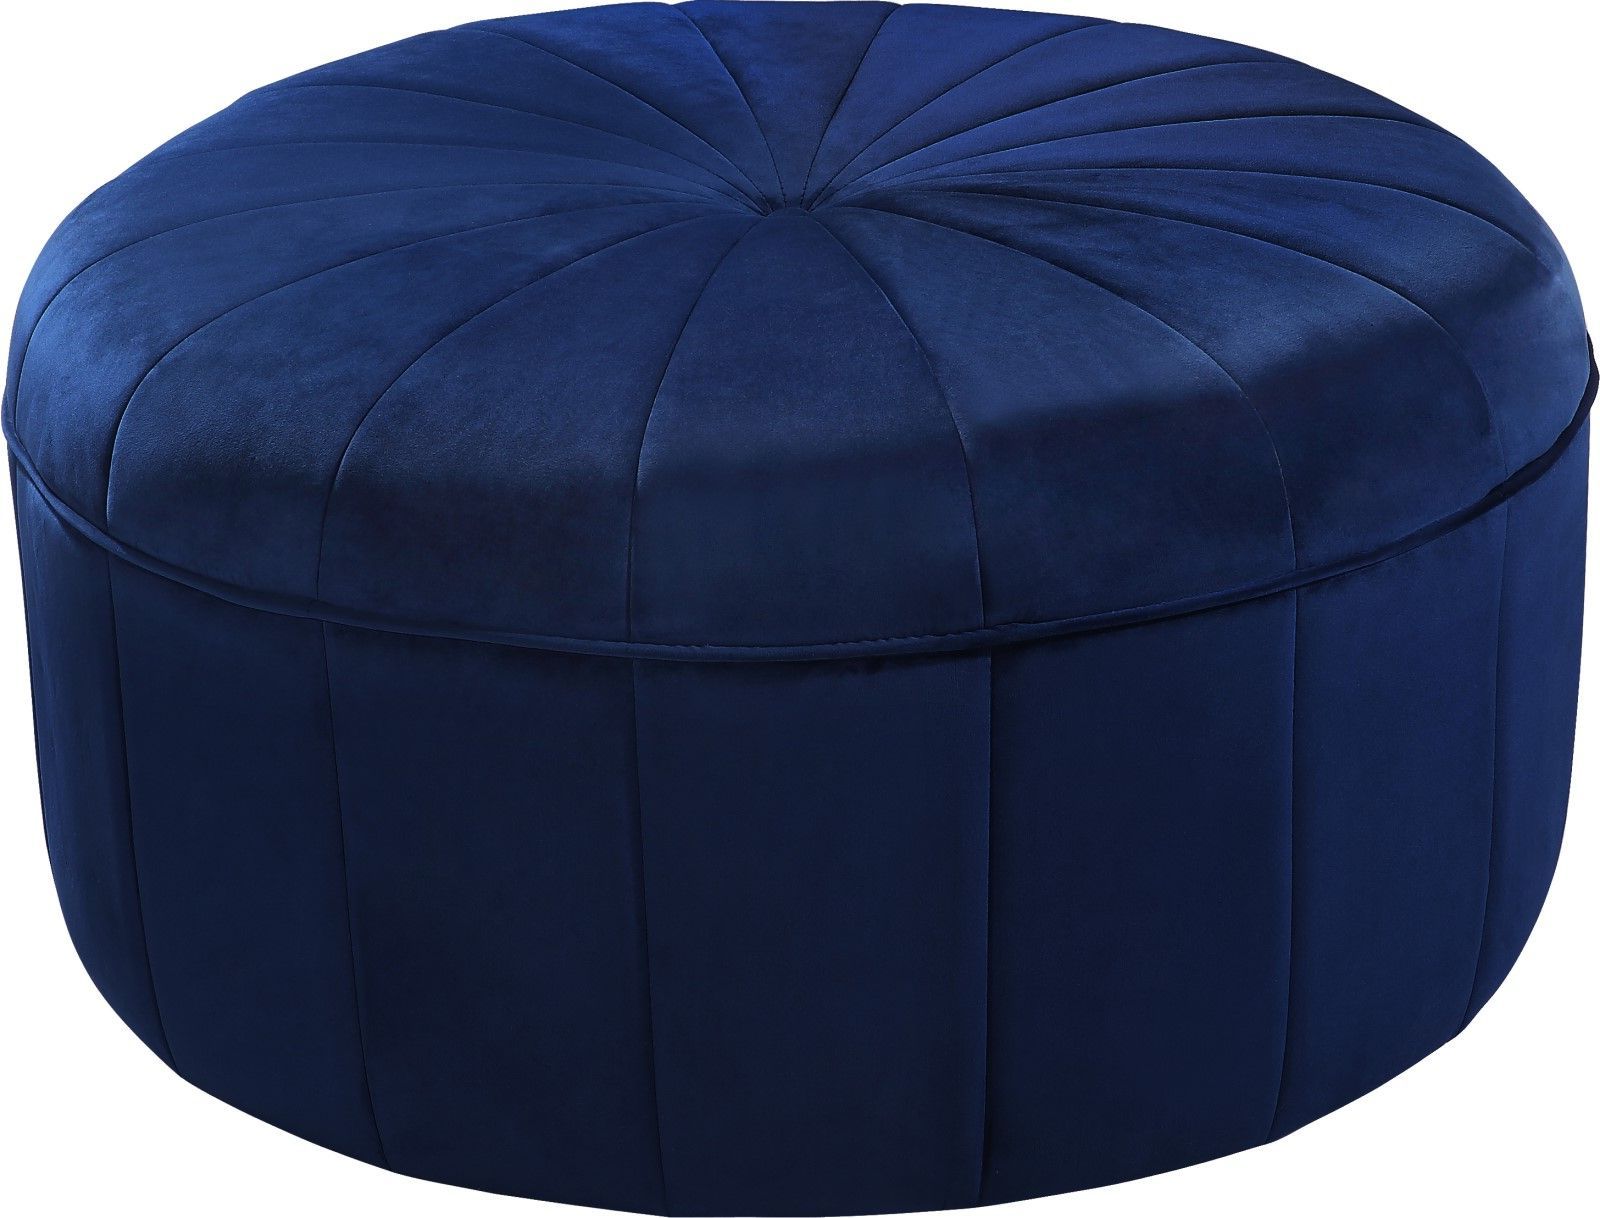 Navy Velvet Fabric Benches With Regard To Current Thane Contemporary Round Ottoman Bench In Navy Blue Channel Tufted Velvet (View 2 of 10)